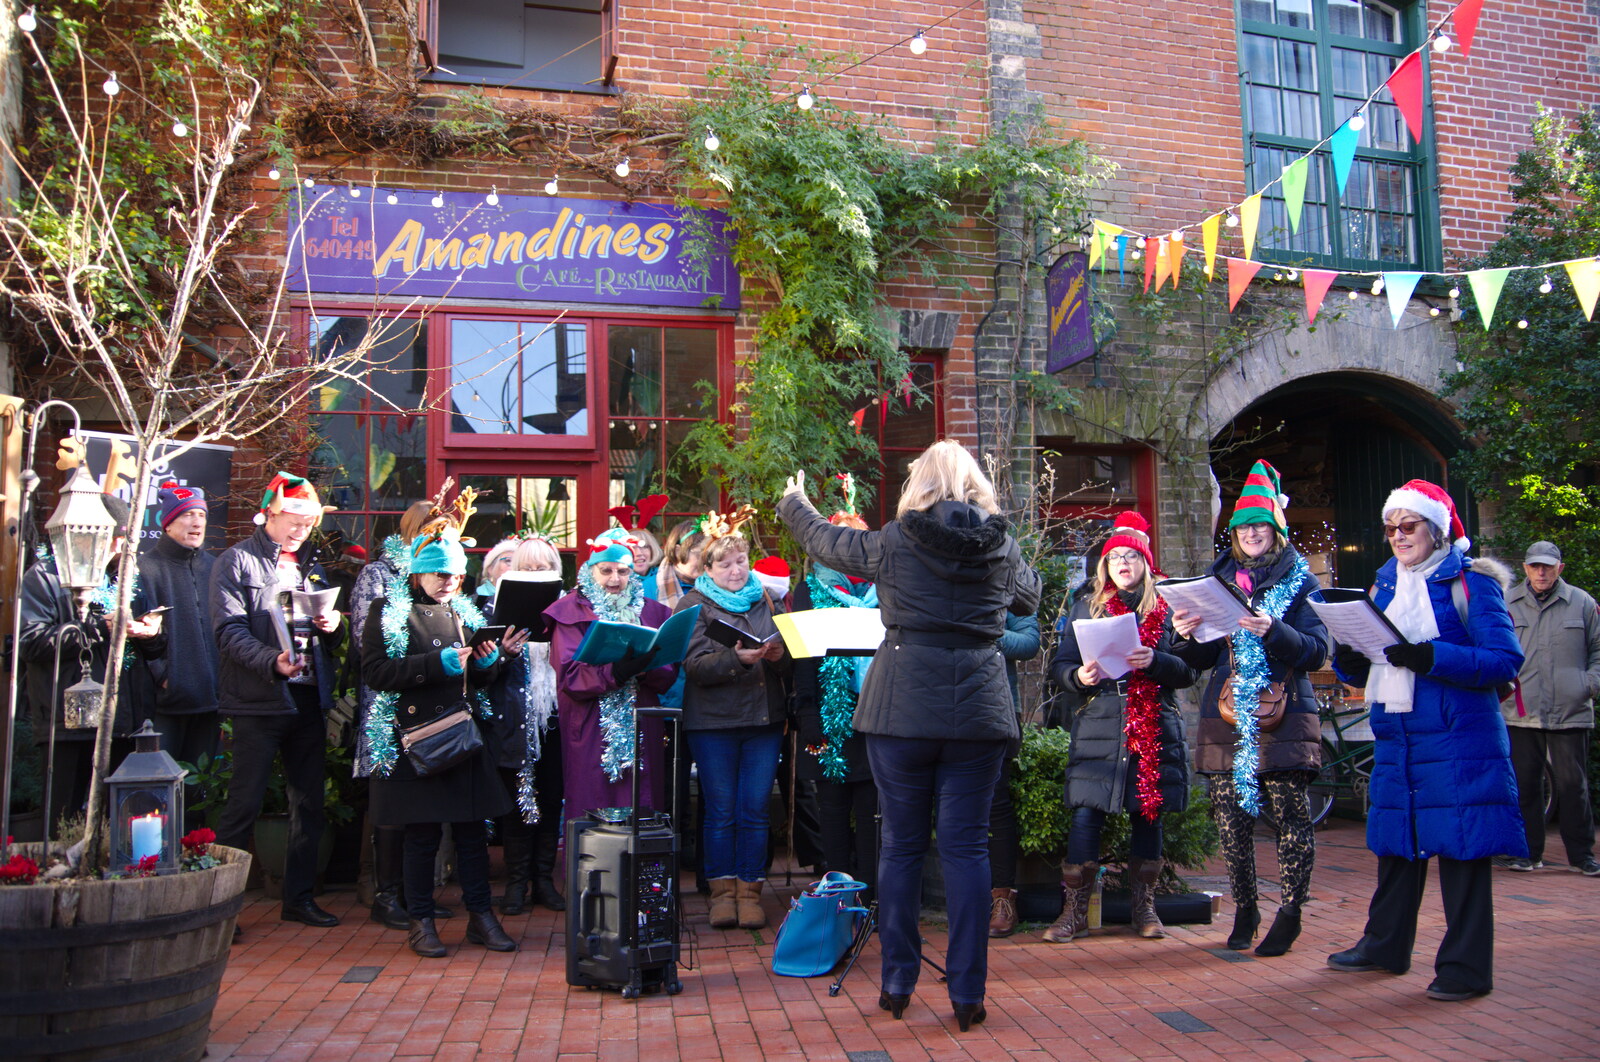 More singing in Norfolk Yard, Diss from The St. Nicholas Street Winter Fayre, Diss, Norfolk - 14th December 2019